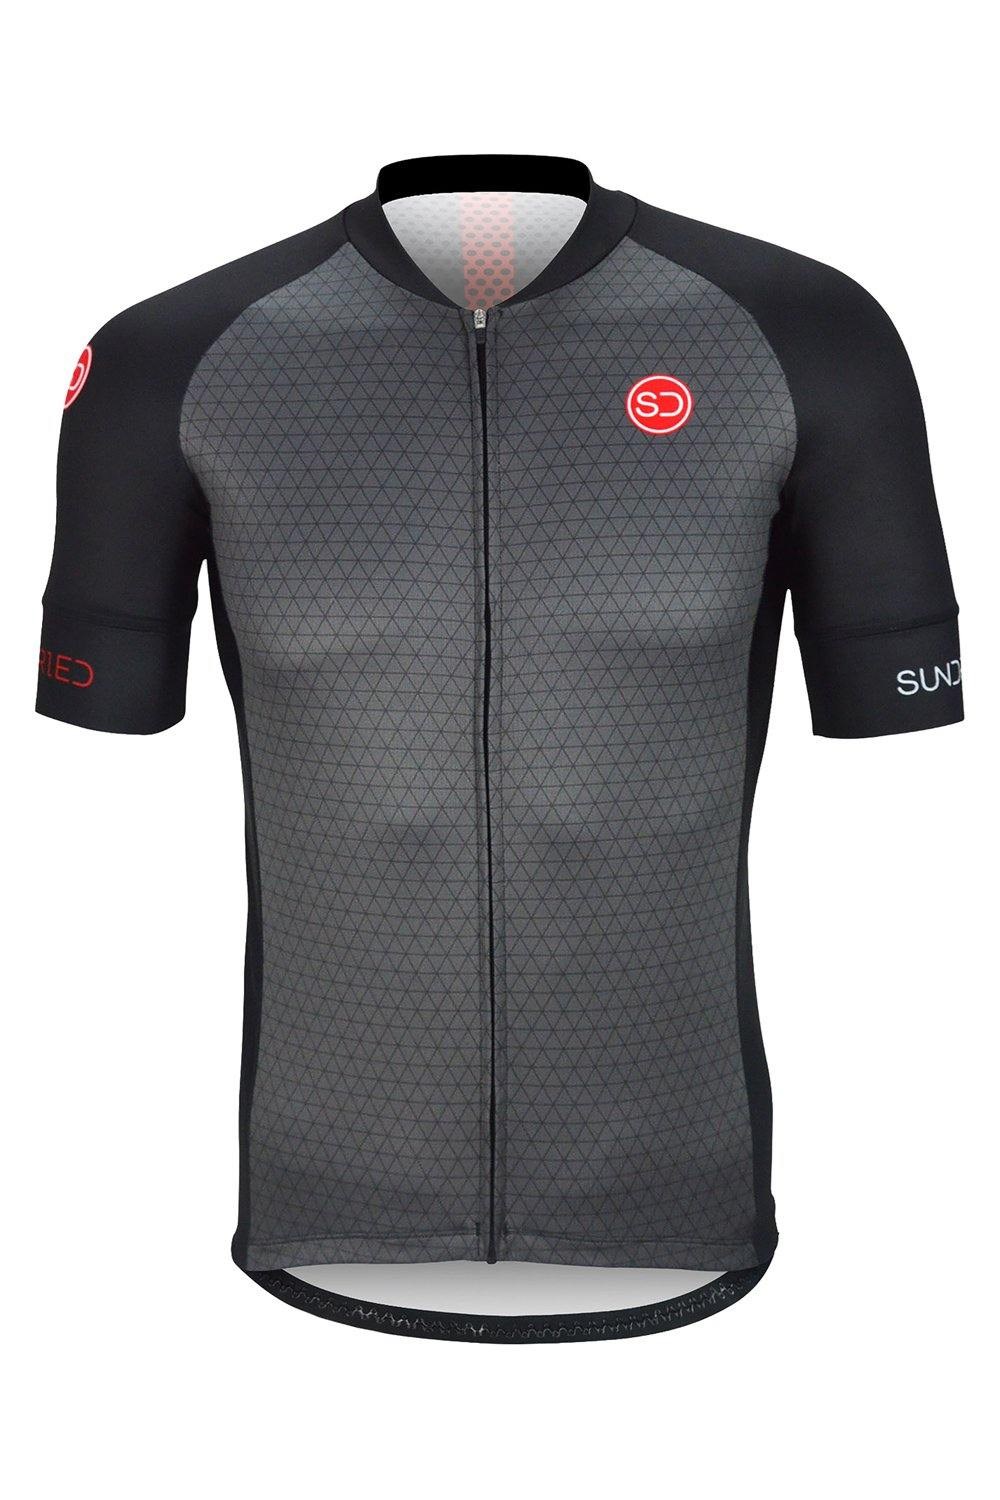 Century Mens Cycle Jersey -